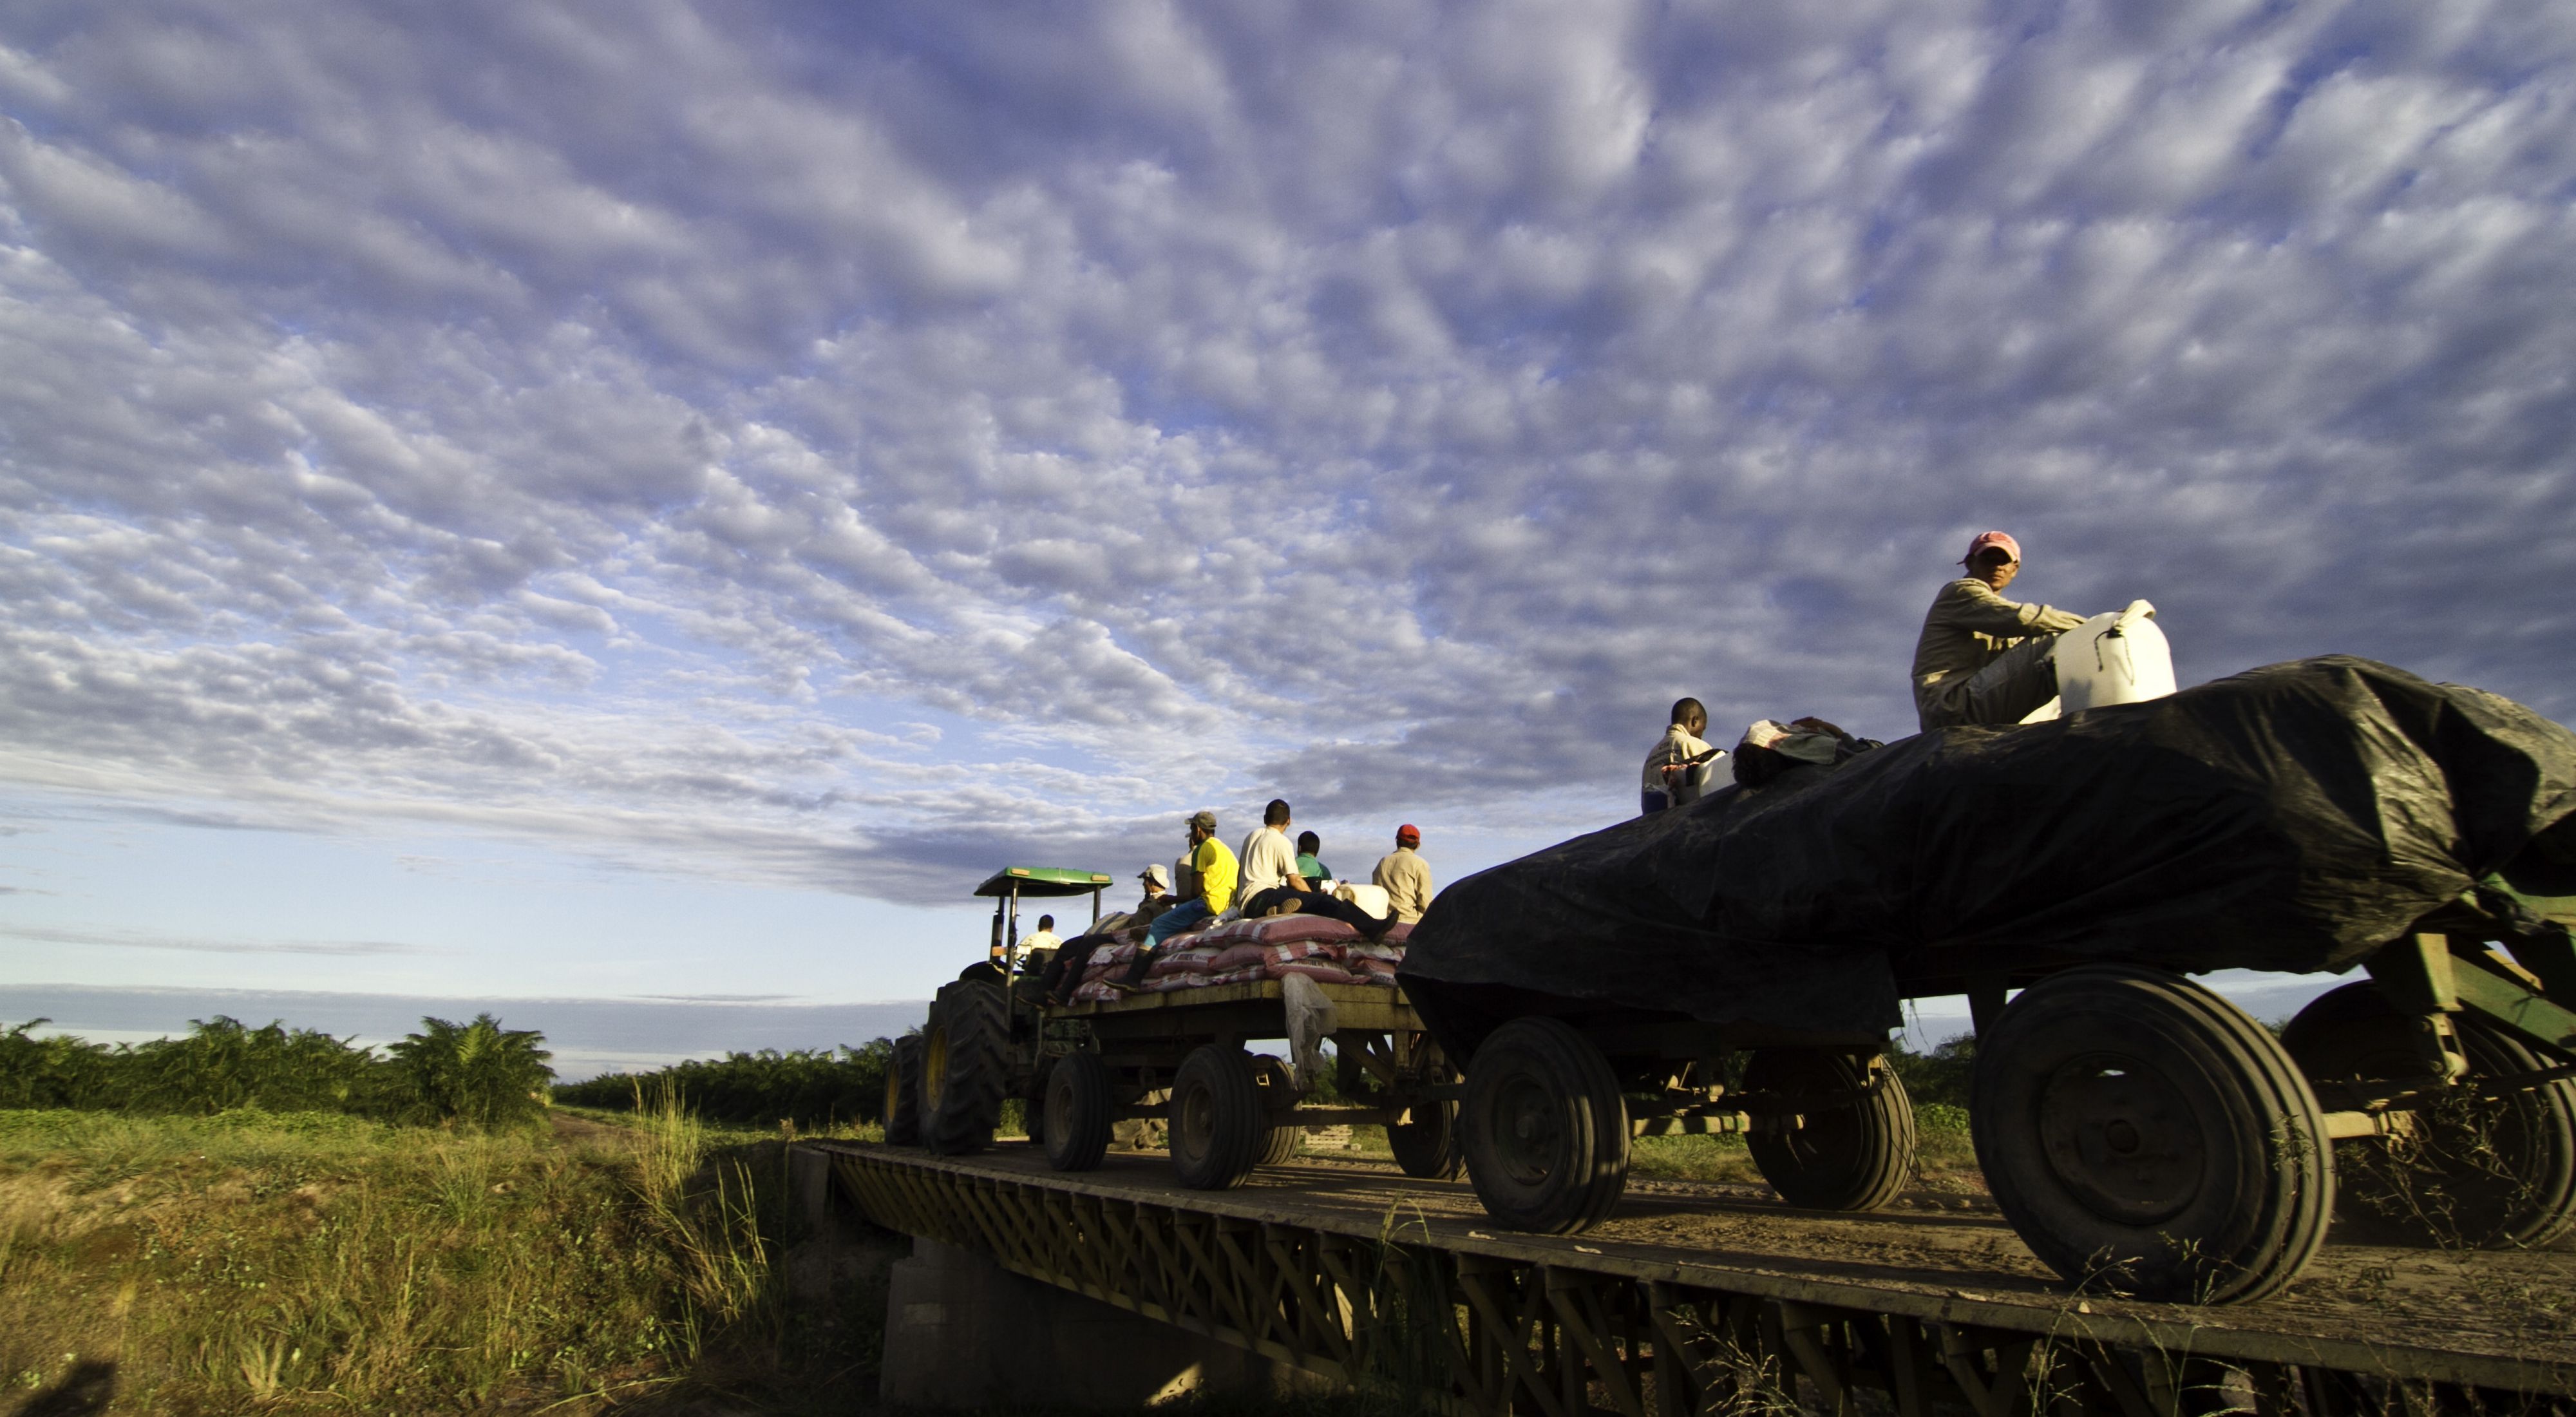 Workers on tractor equipment cross a bridge on a palm oil farm.